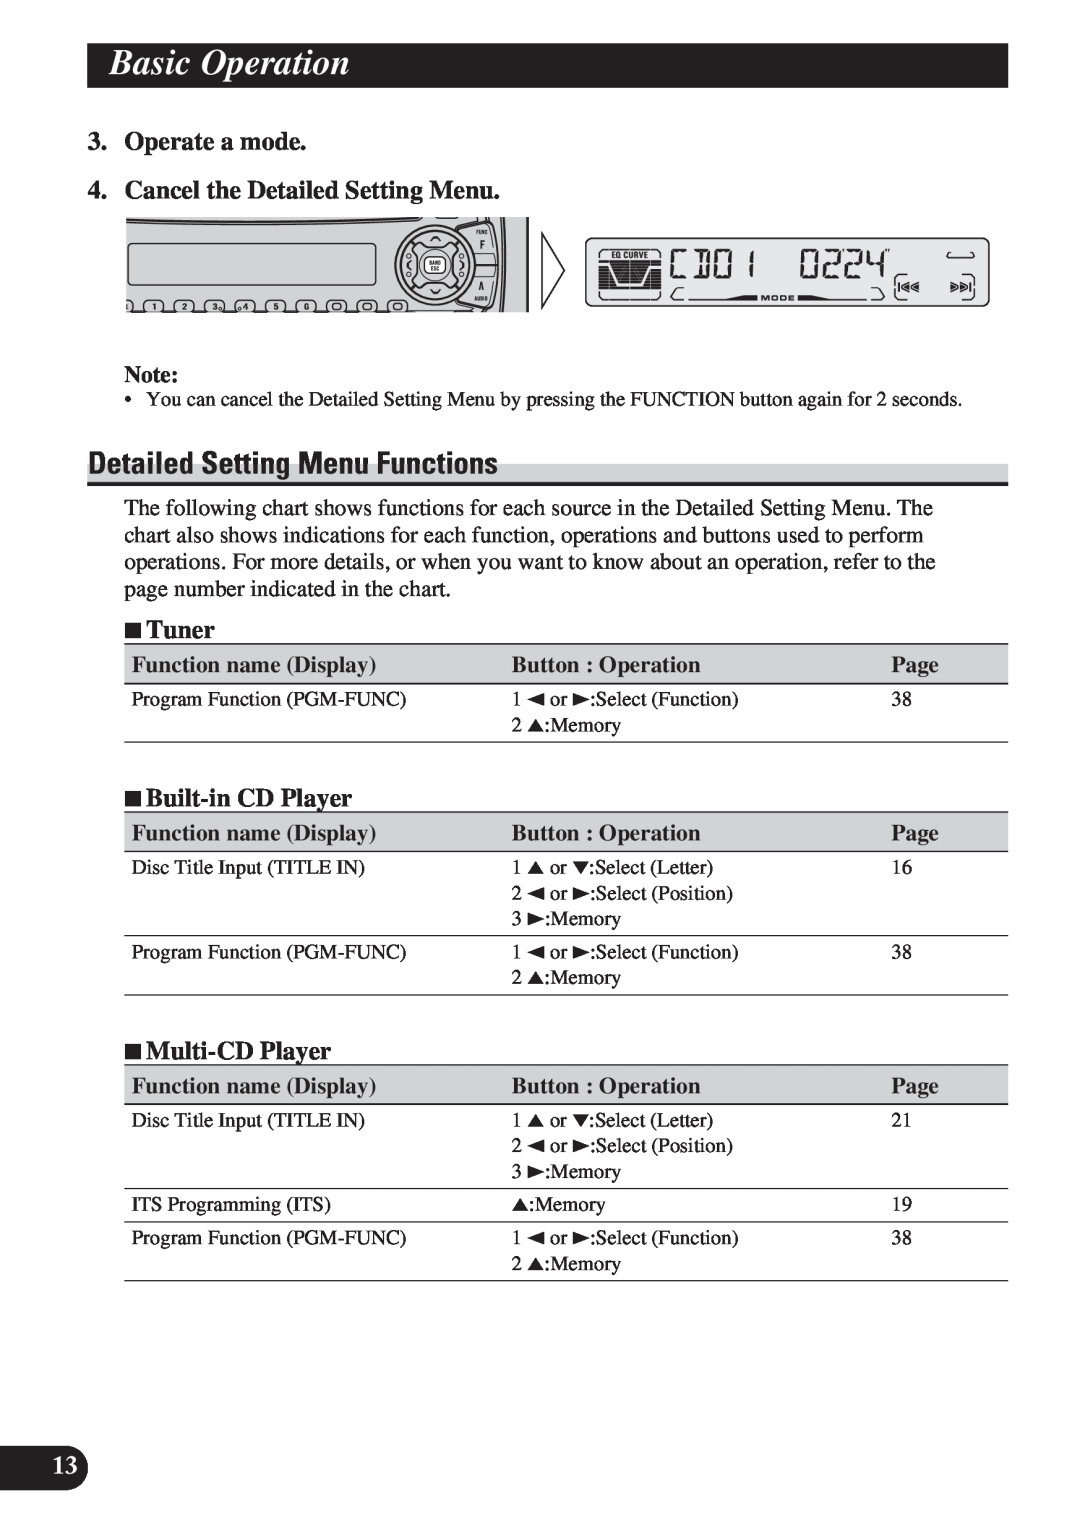 Pioneer DEH-P4150 Detailed Setting Menu Functions, Operate a mode, Cancel the Detailed Setting Menu, Basic Operation, Page 